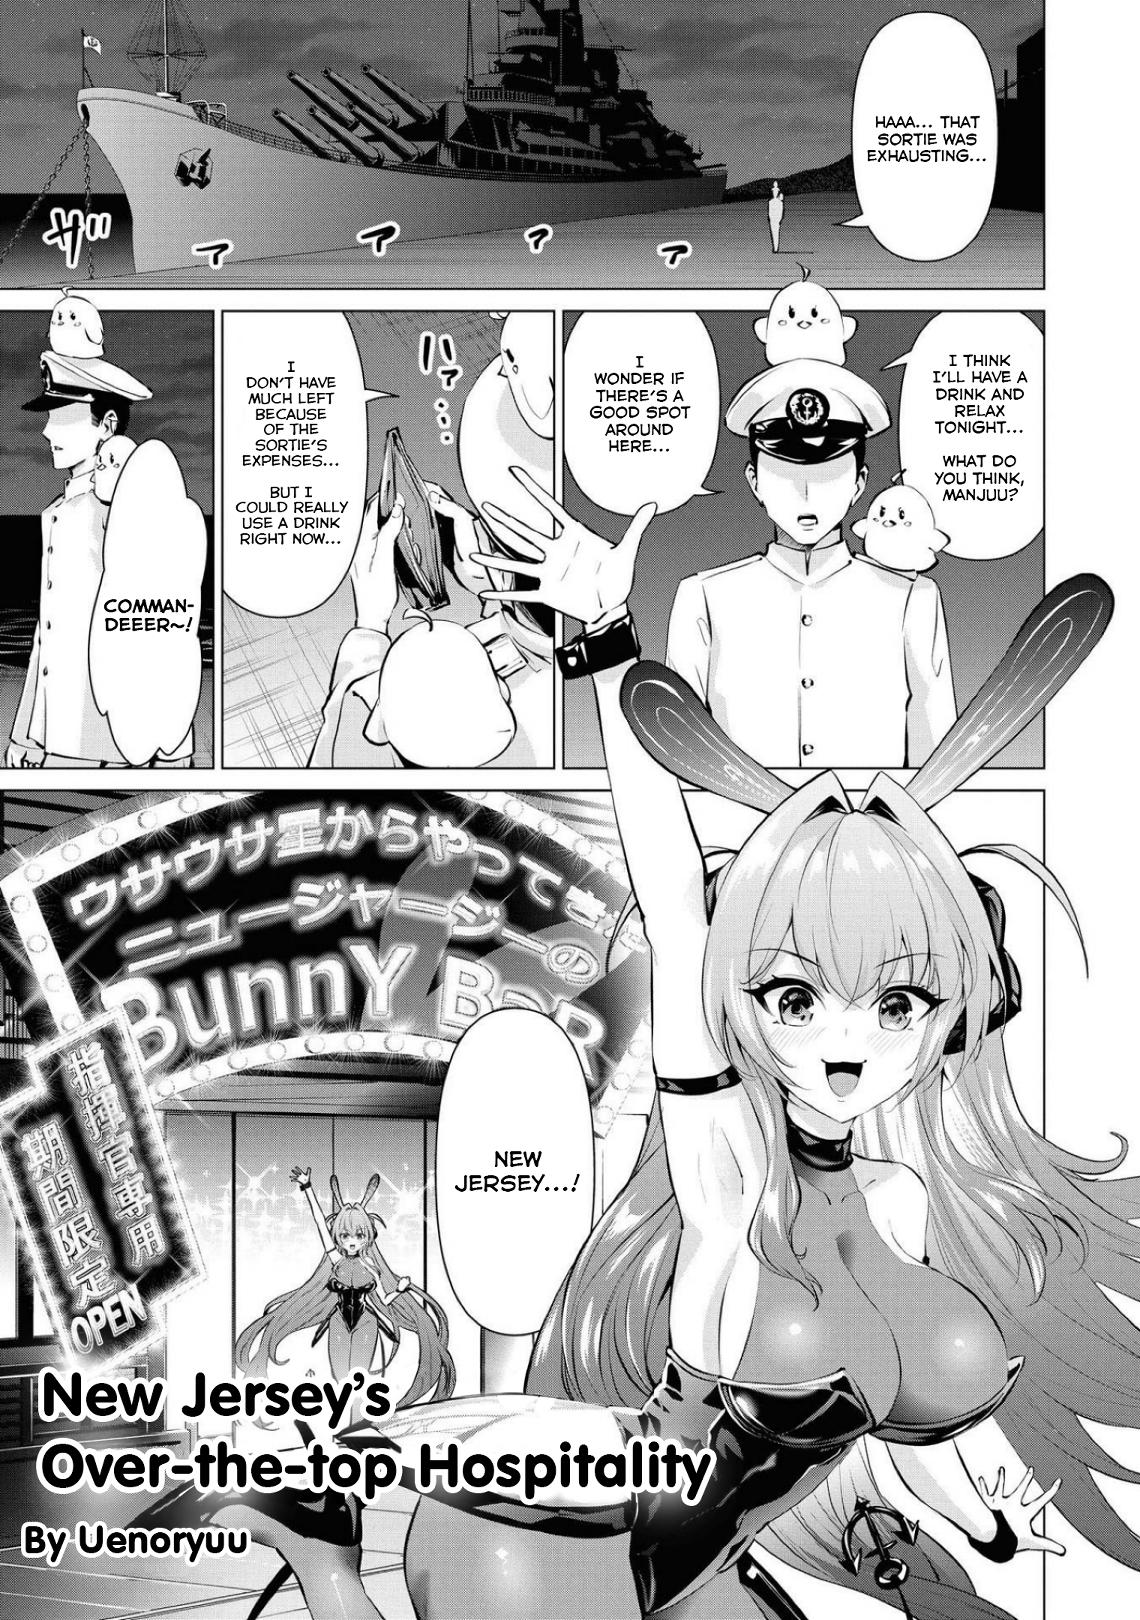 Azur Lane Comic Anthology Breaking!! Vol.5 Chapter 56: New Jersey's Over-The-Top Hospitality page 7 - Mangakakalot